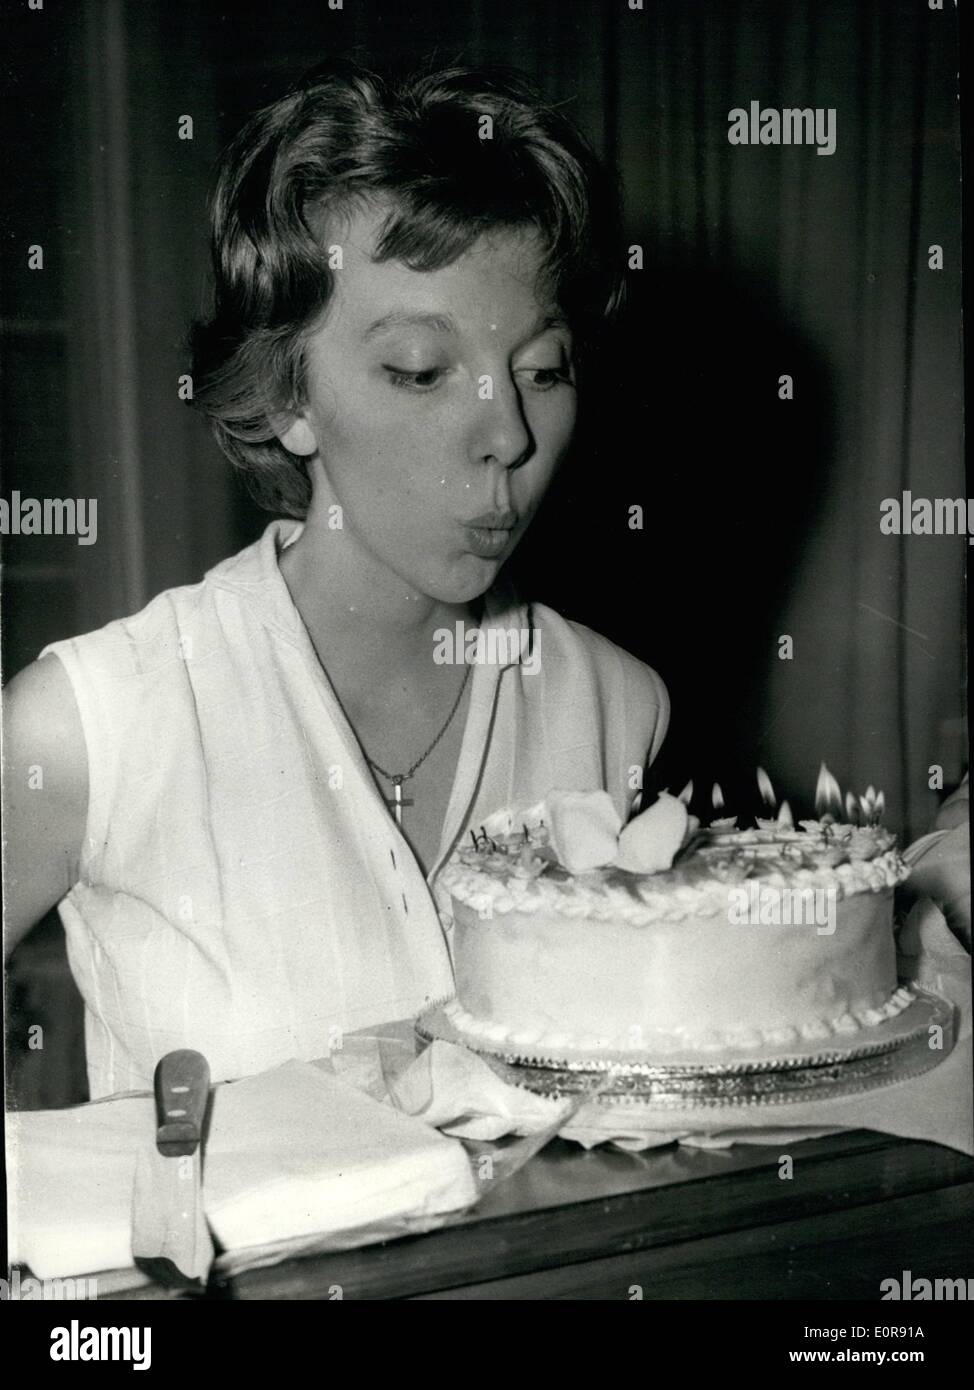 Aug. 08, 1958 - Anna Massey Celebrates Her Twenty-First Birthday Surprise Cake: A Celebration was held between rehearsals on the stage Criterion Theatre this afternoon - for the 21st. birthday of Anna Massey the star f the show - ''The Elder Statesman''. As a surprise she was presented with a birthday cake - by Henry Sherek - who present the play. Photo Shows Anna Massey bl;ow out the candles of her surprise birthday cake this afternoon. Stock Photo